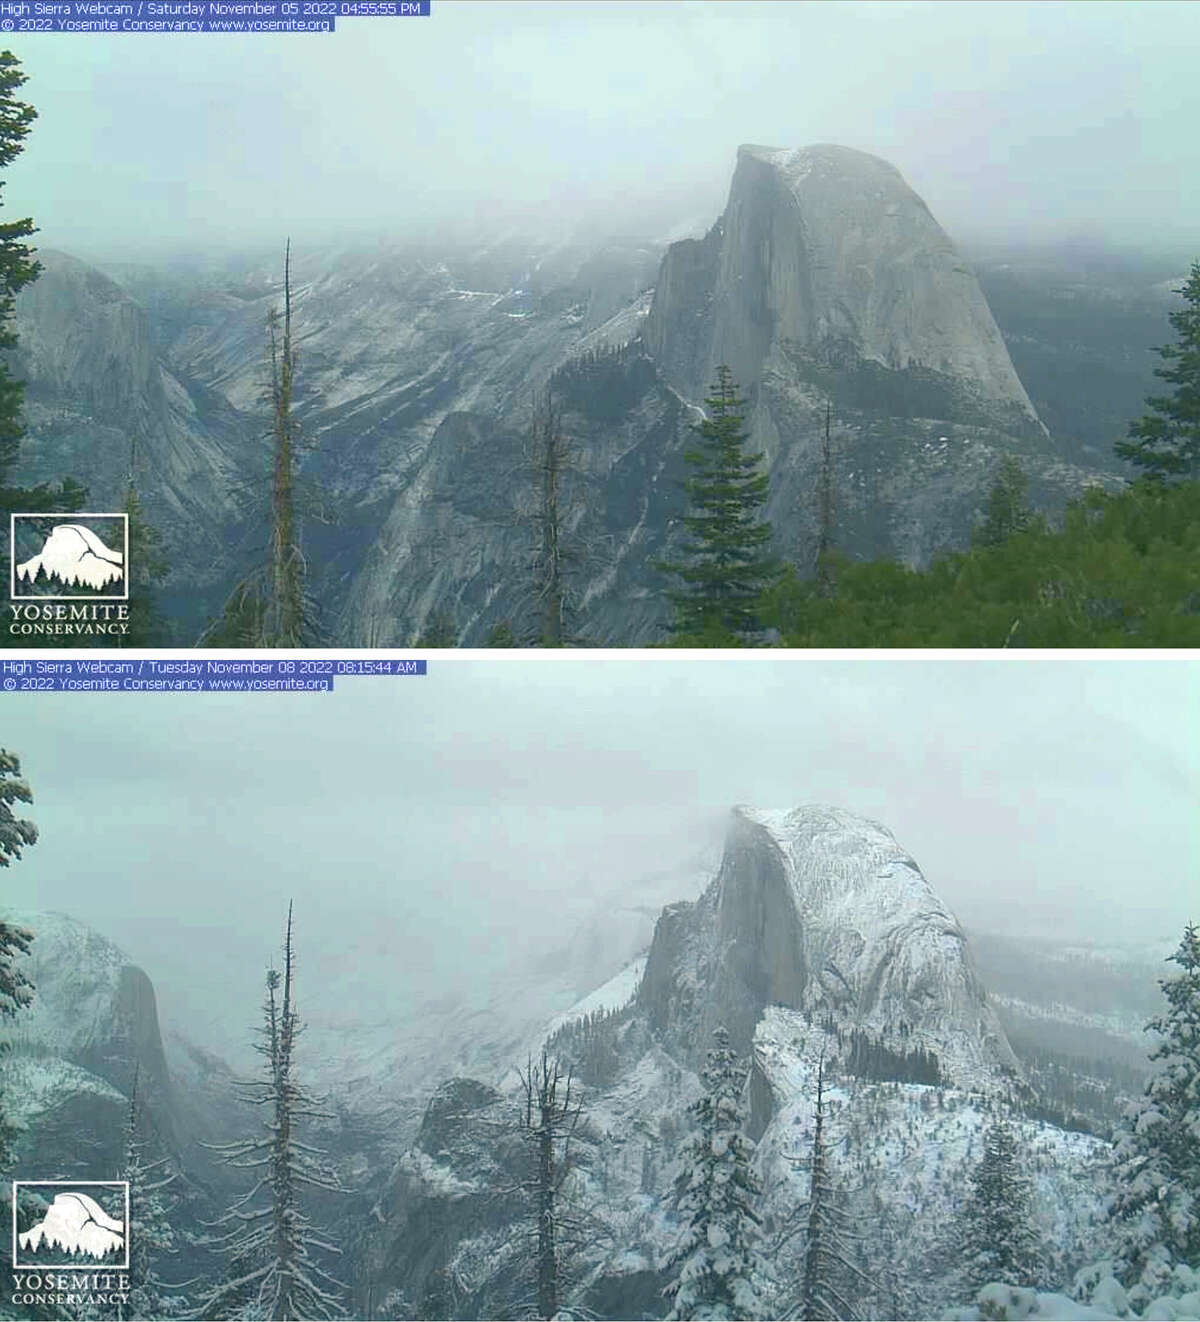 Contrasting views of Half Dome in Yosemite National Park, CA, as seen from a webcam atop Sentinel Dome on Saturday, Nov. 5, top, and after recent snow on Tuesday Nov. 8, below.